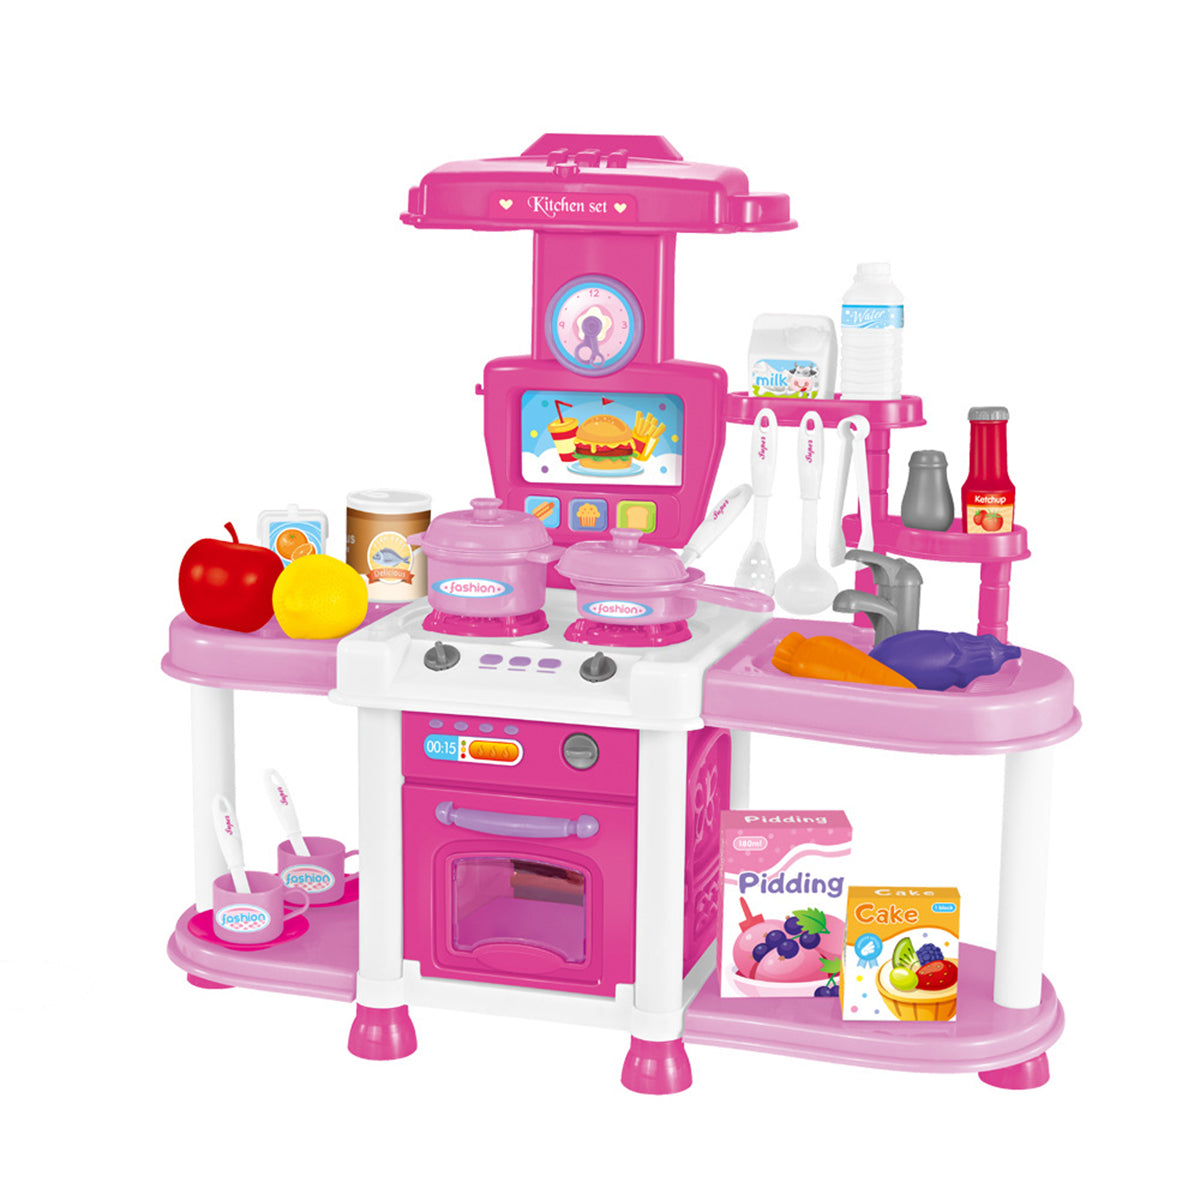 Children s Playhouse Kitchen Toy Set Sound And Light Sound Effects Girls Cook And Cook Utensils